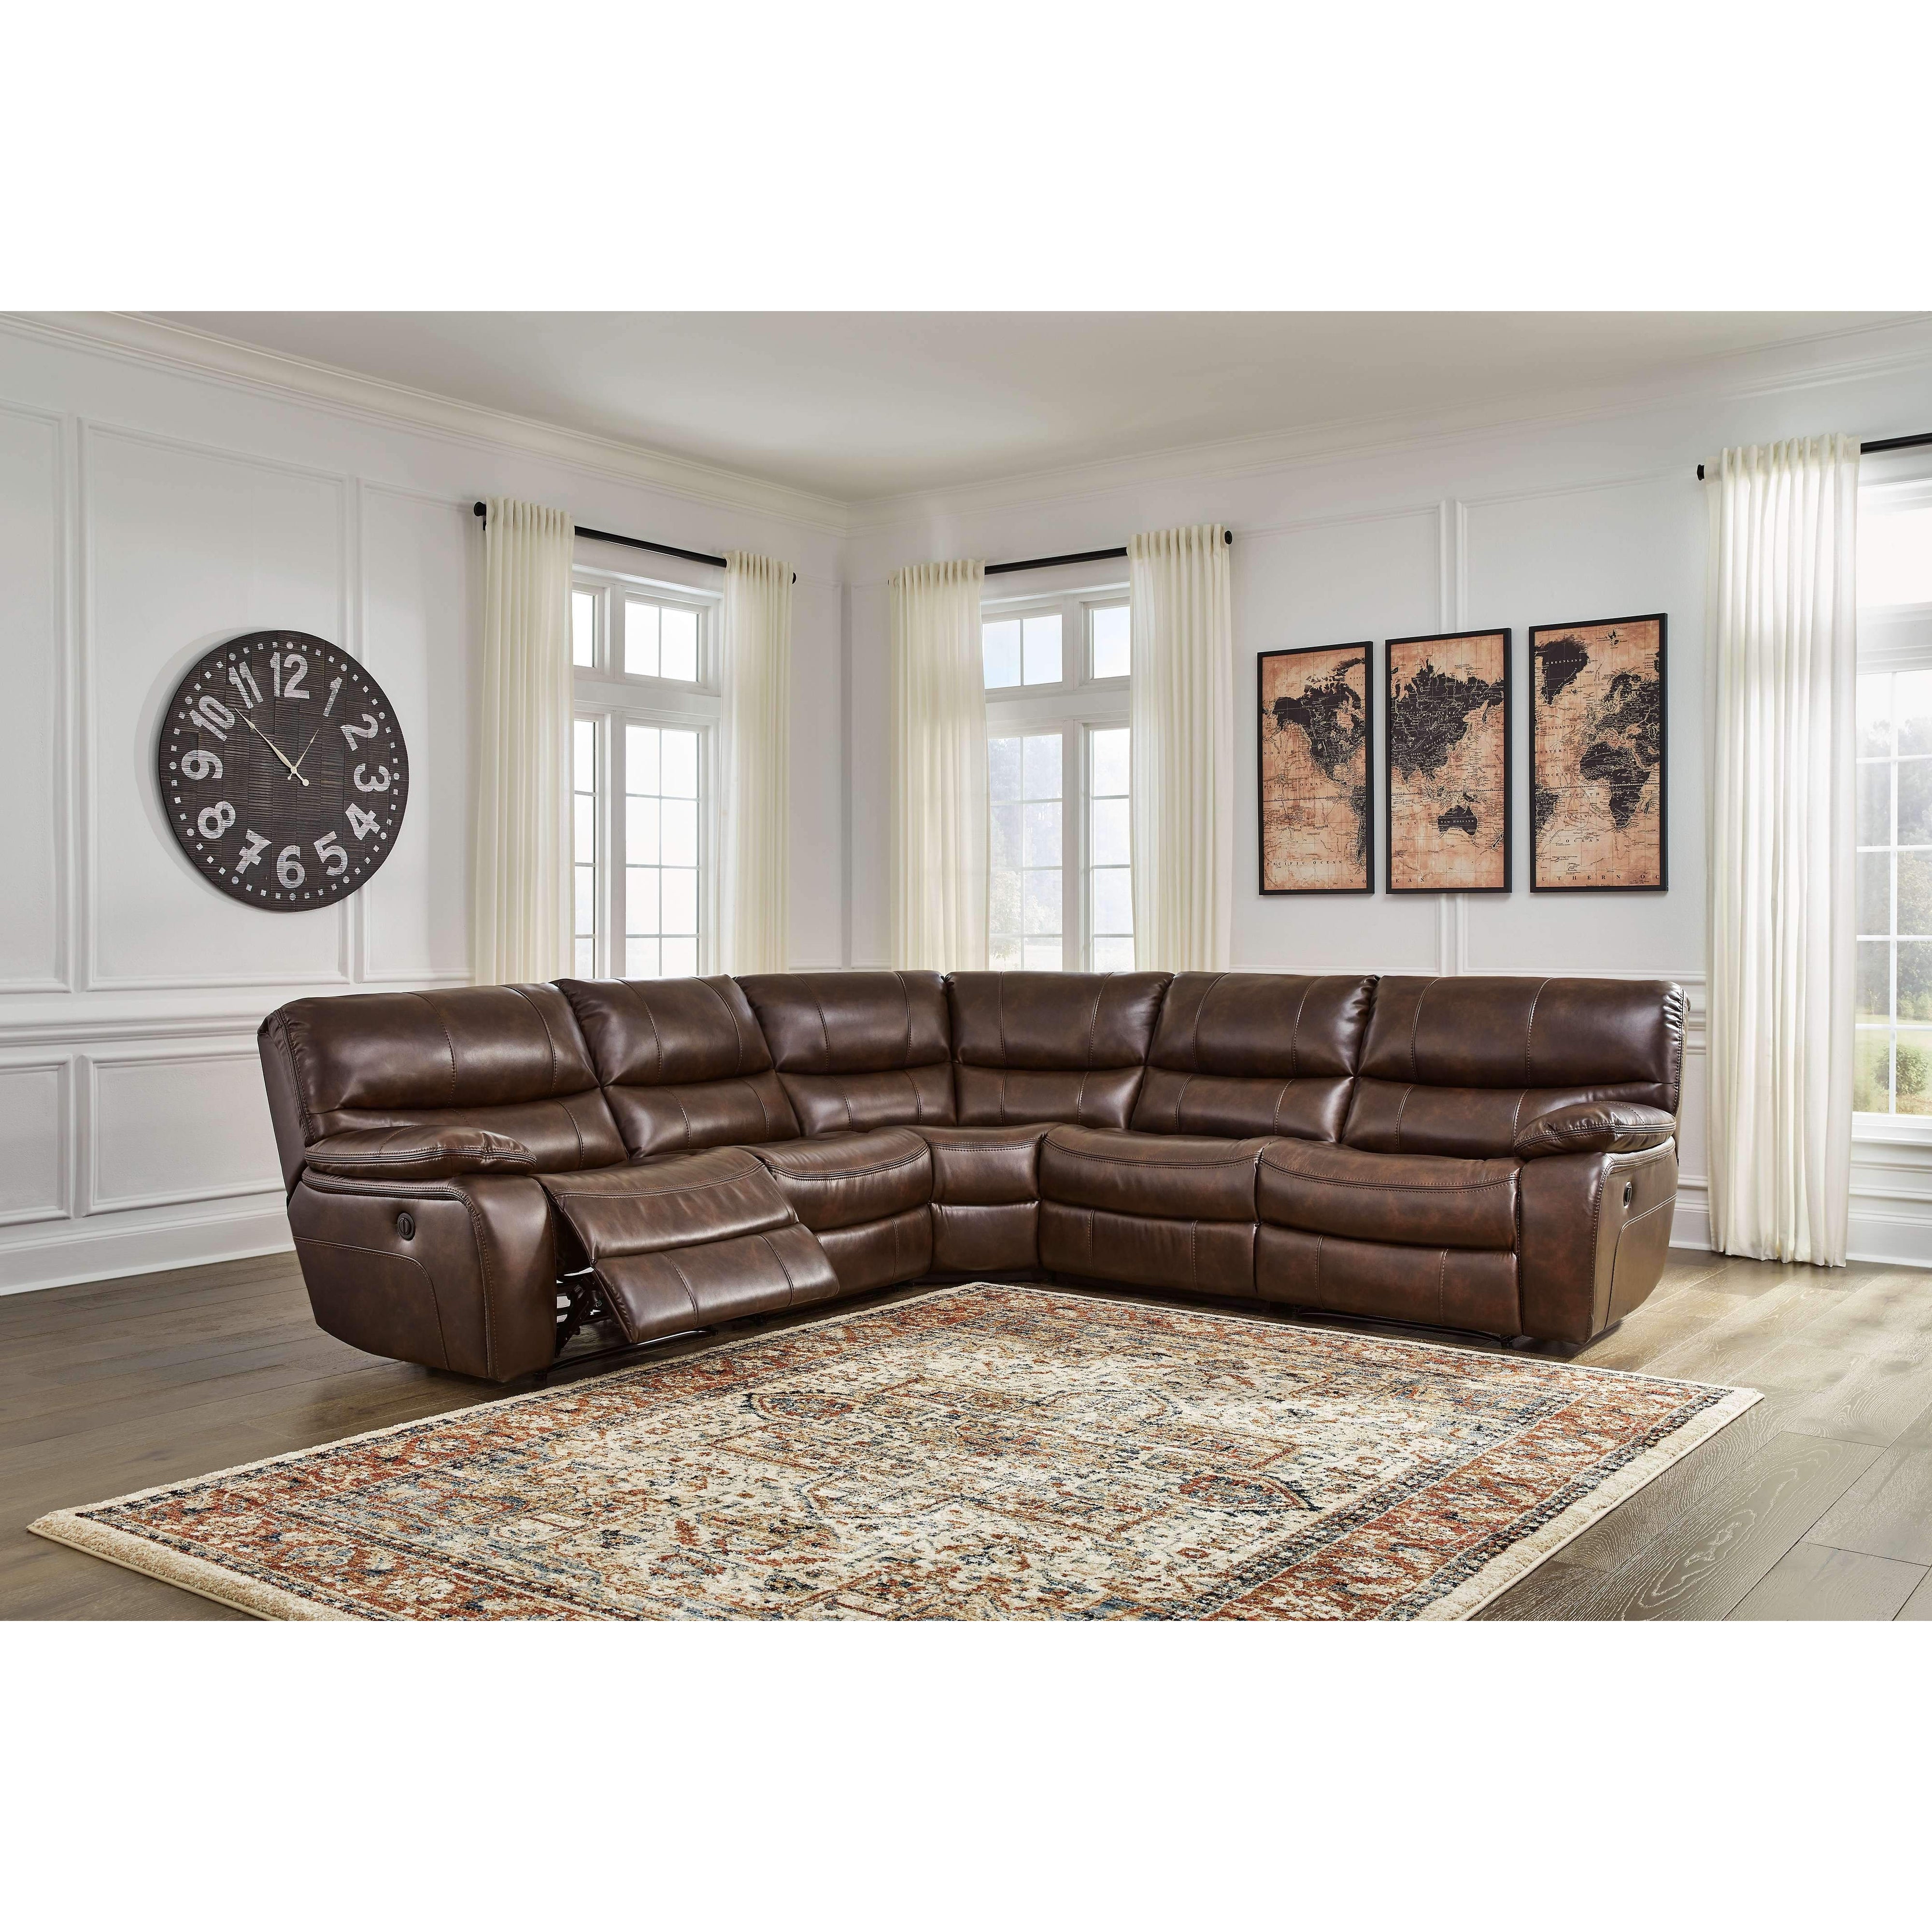 Mayall - Chocolate - Left Arm Facing Power Recliner 5 Pc Sectional